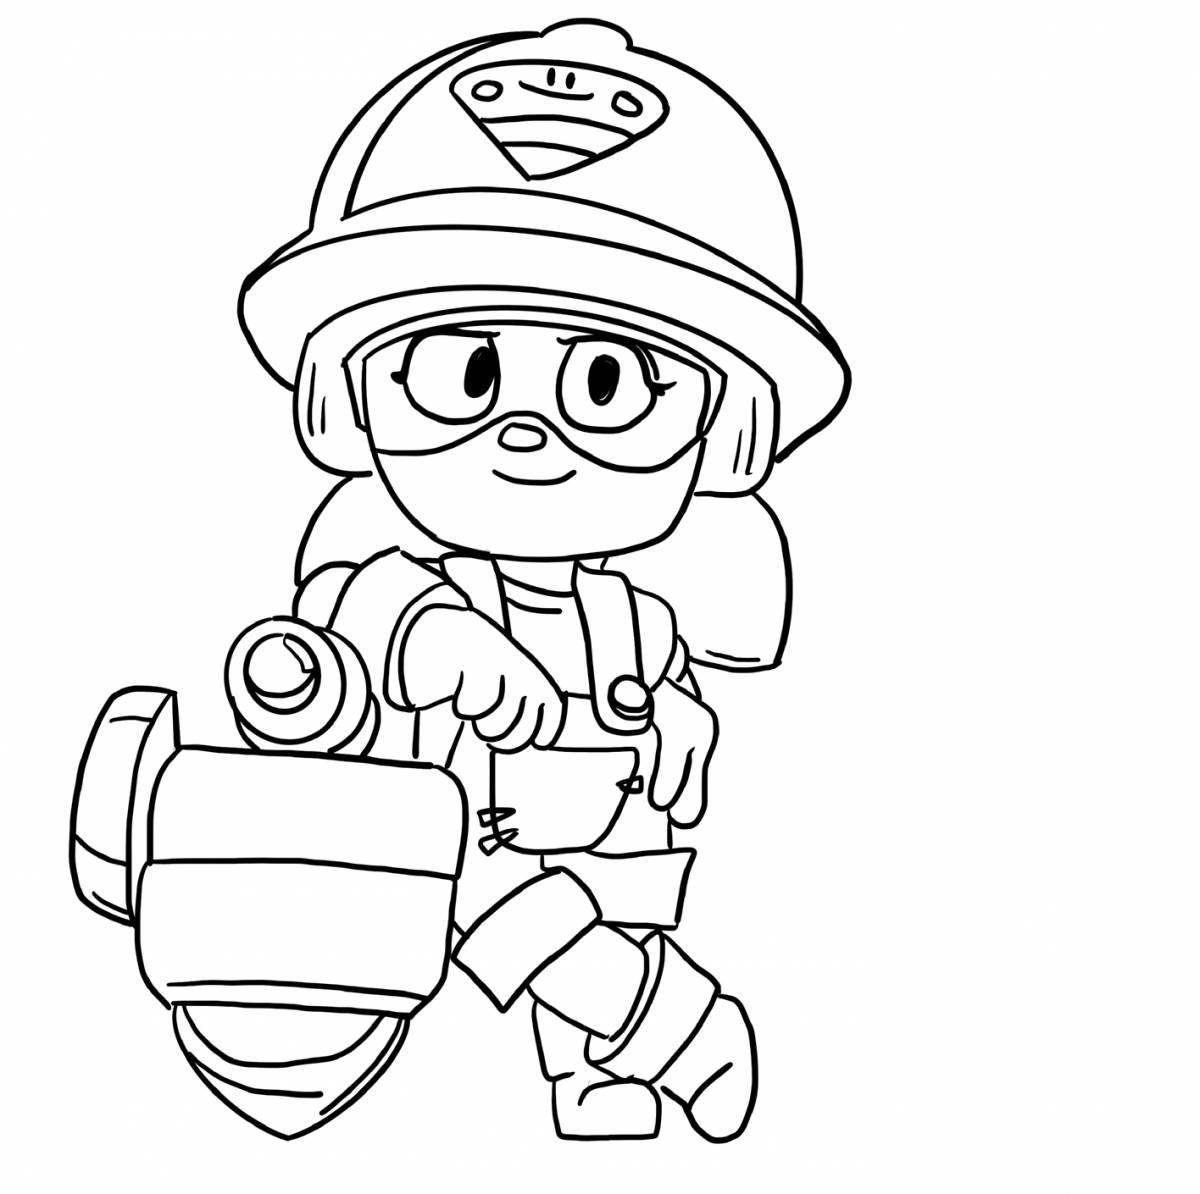 Awesome brawl stars coloring game